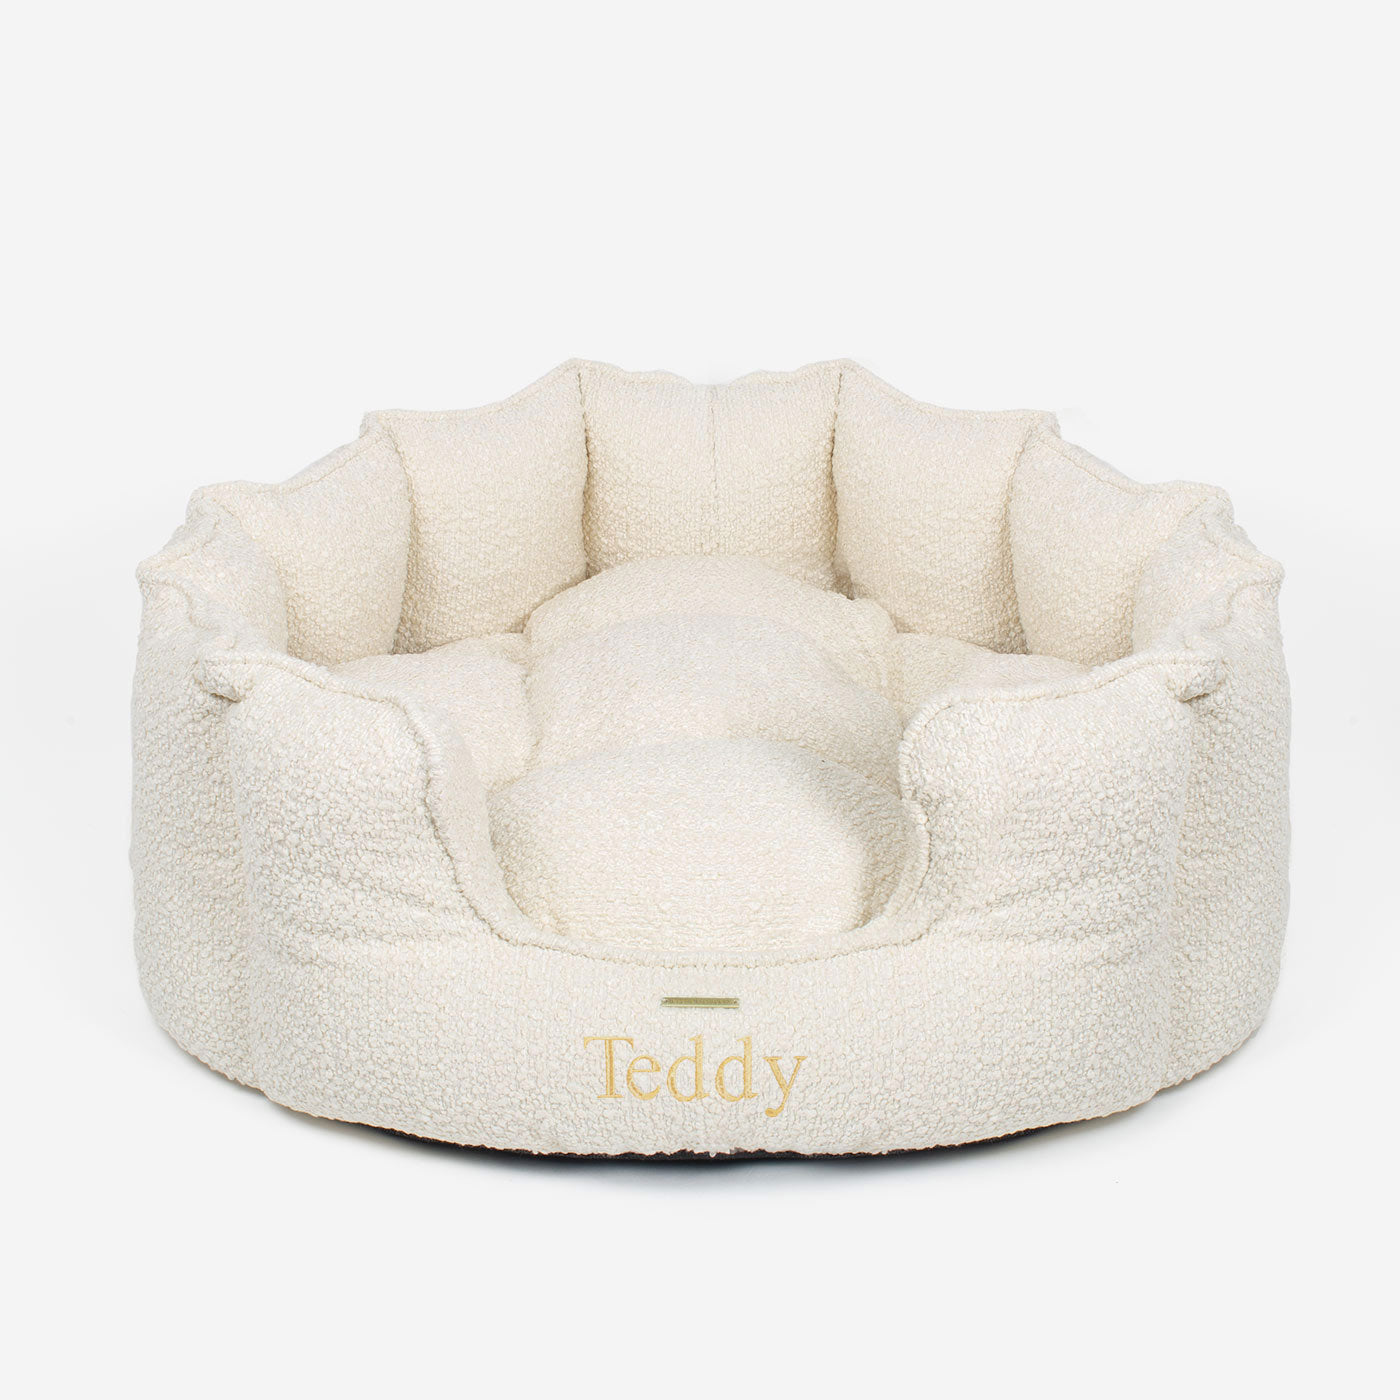 Discover Our Luxurious High Wall Bed For Dogs, Featuring inner pillow with plush teddy fleece on one side To Craft The Perfect Dogs Bed In Stunning Ivory Bouclé! Available To Personalize Now at Lords & Labradors US